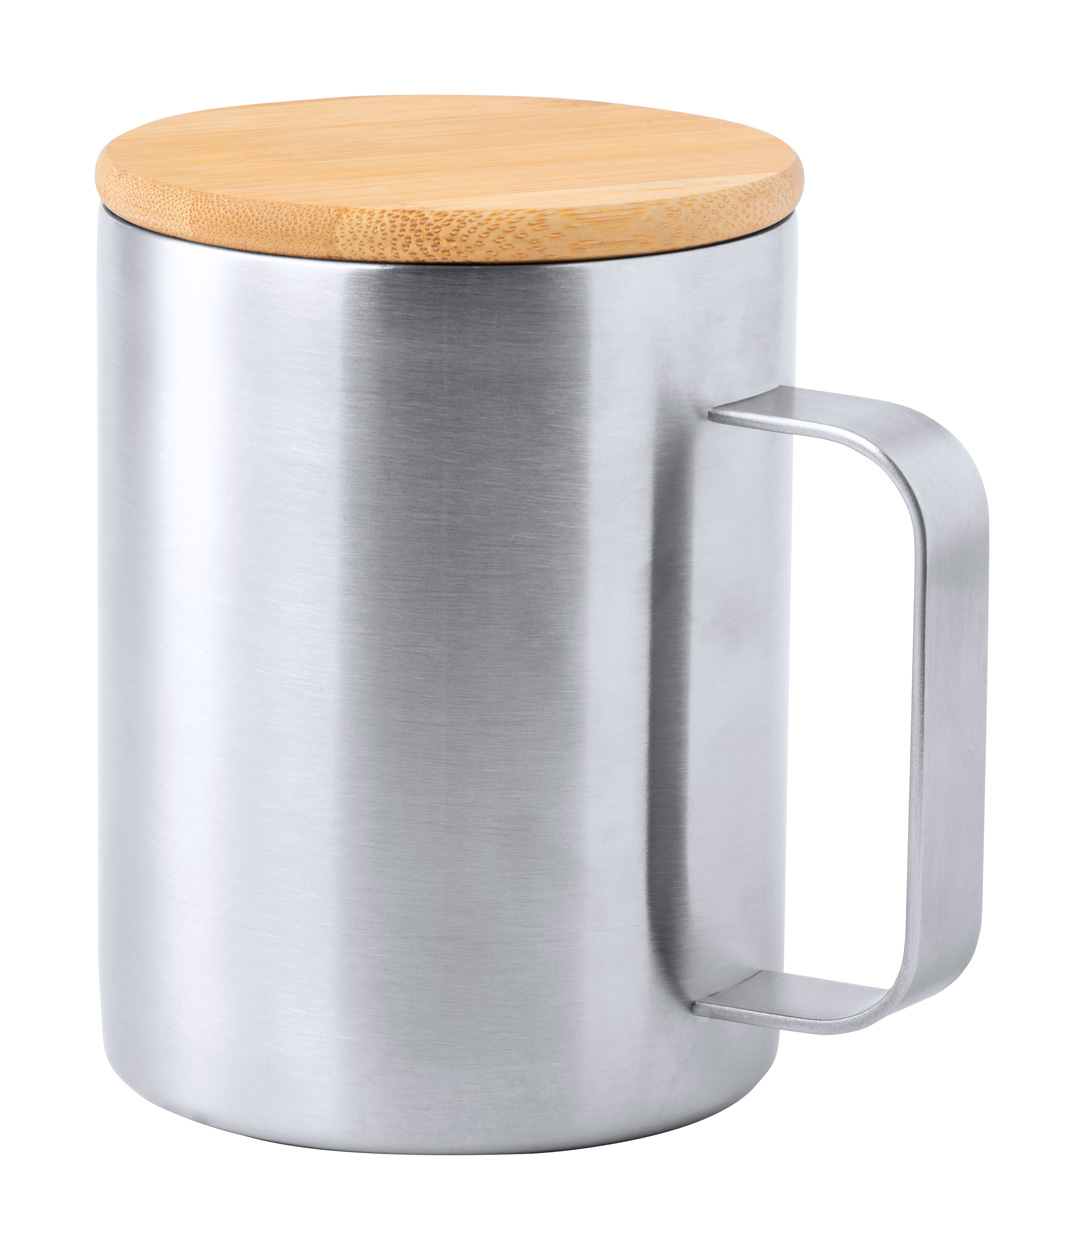 Stainless steel mug RICALY with bamboo lid, 350 ml - silver / natural